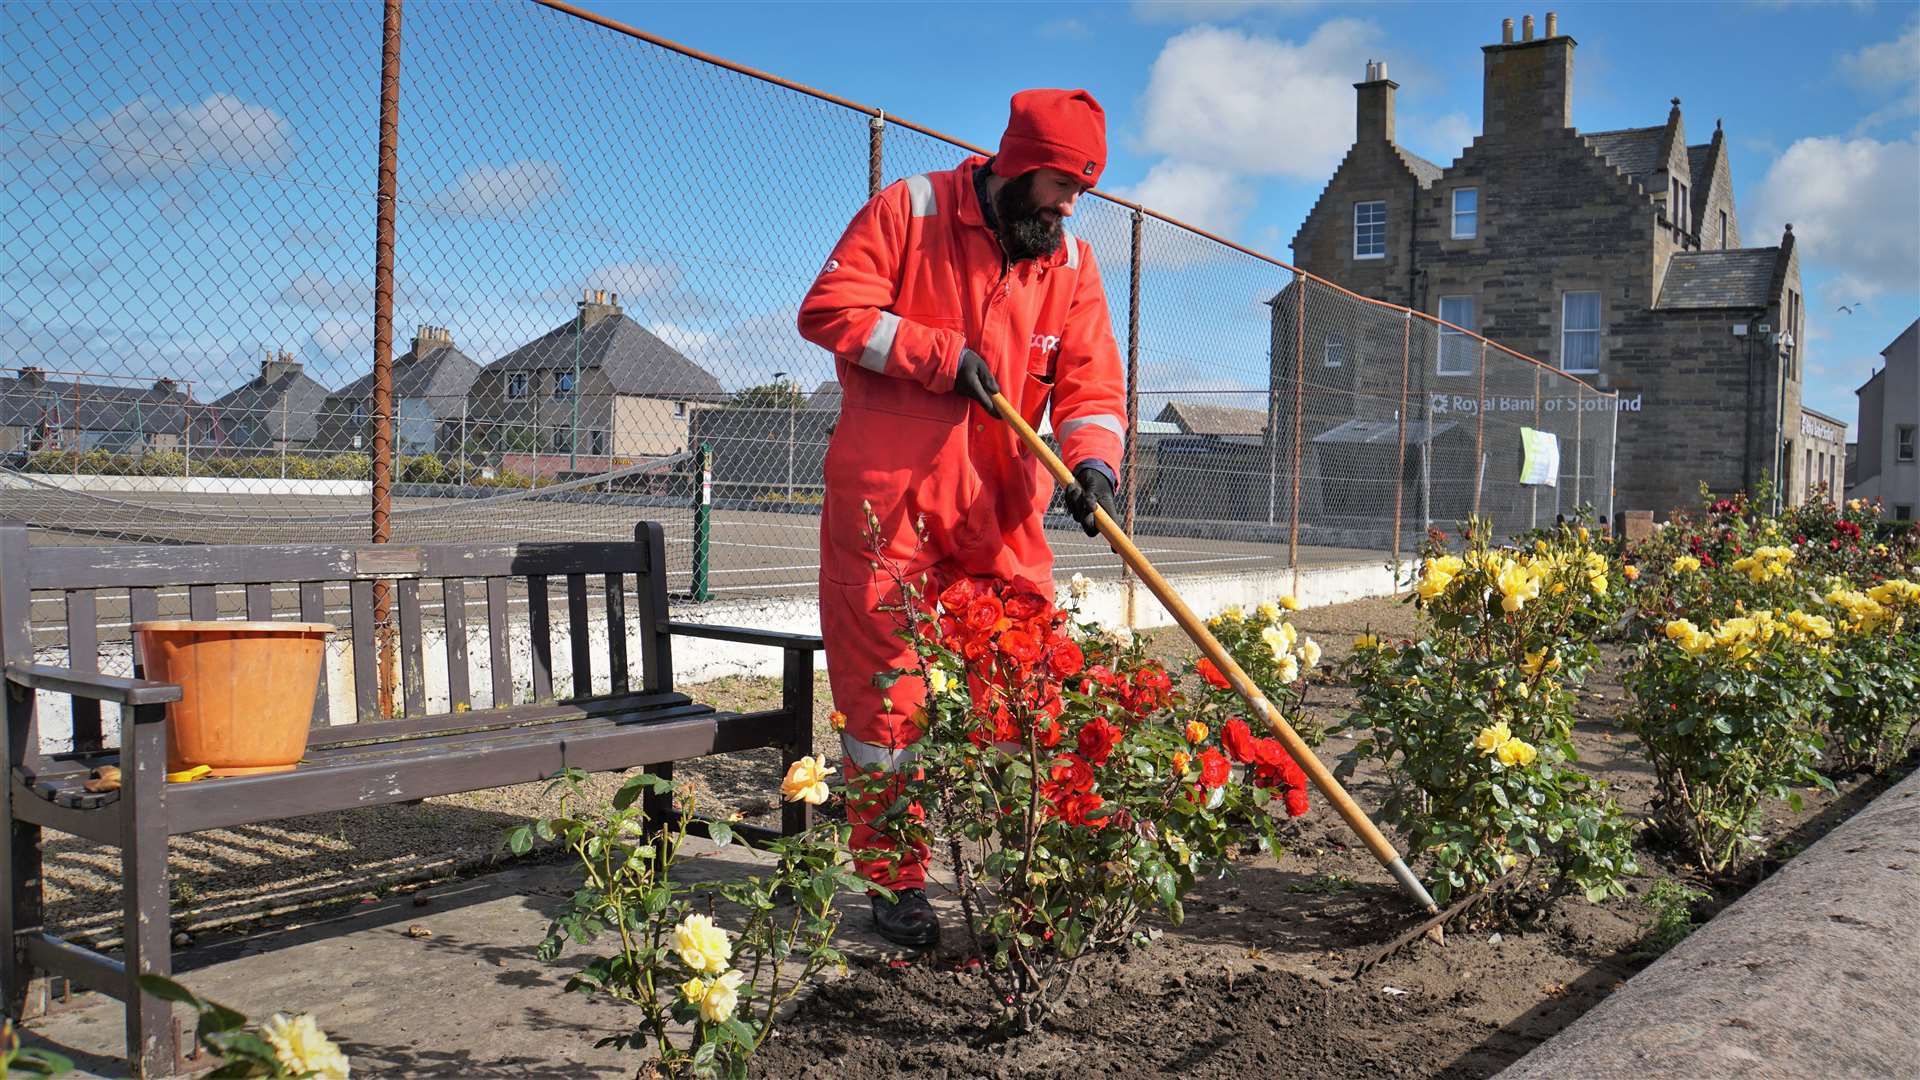 Alexander Glasgow tends to rose beds in the centre of Thurso. Picture: DGS